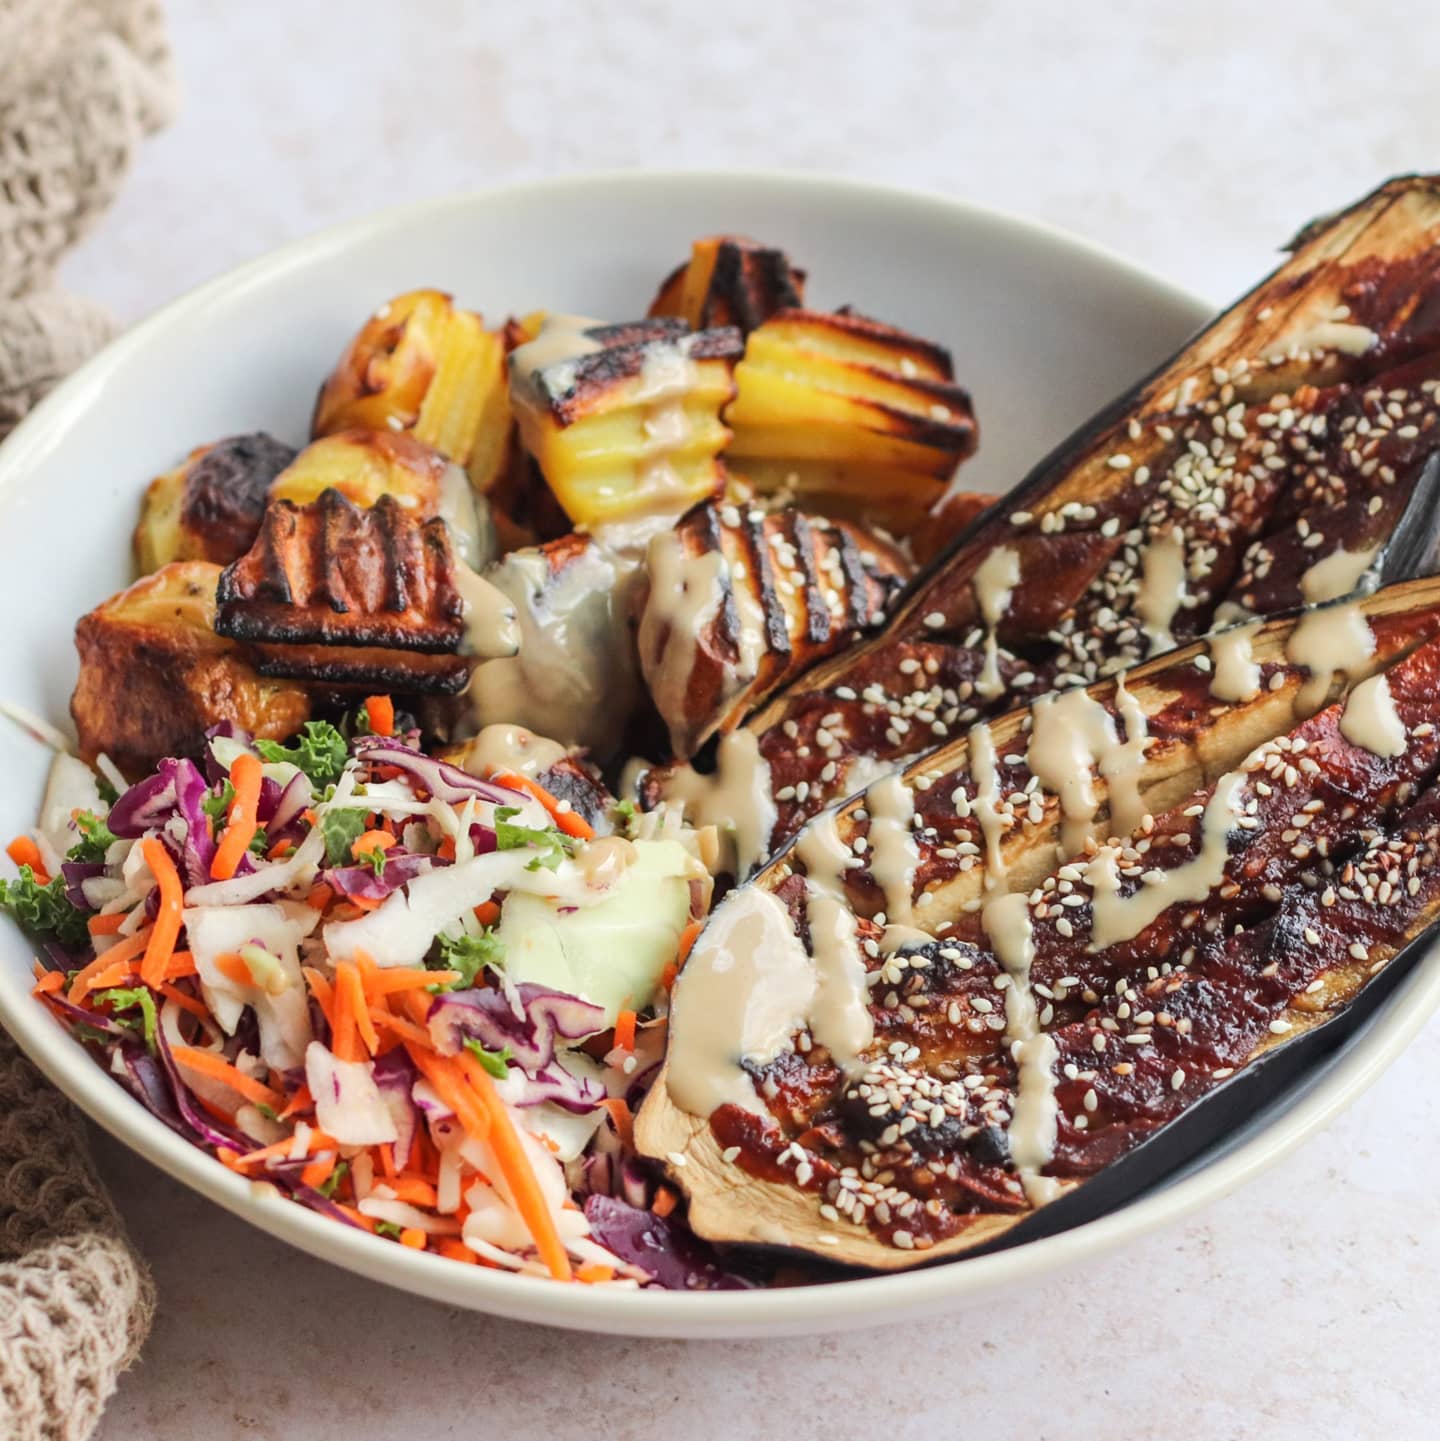 Miso Marinated Eggplant with Air-Fried Roasted Veggies